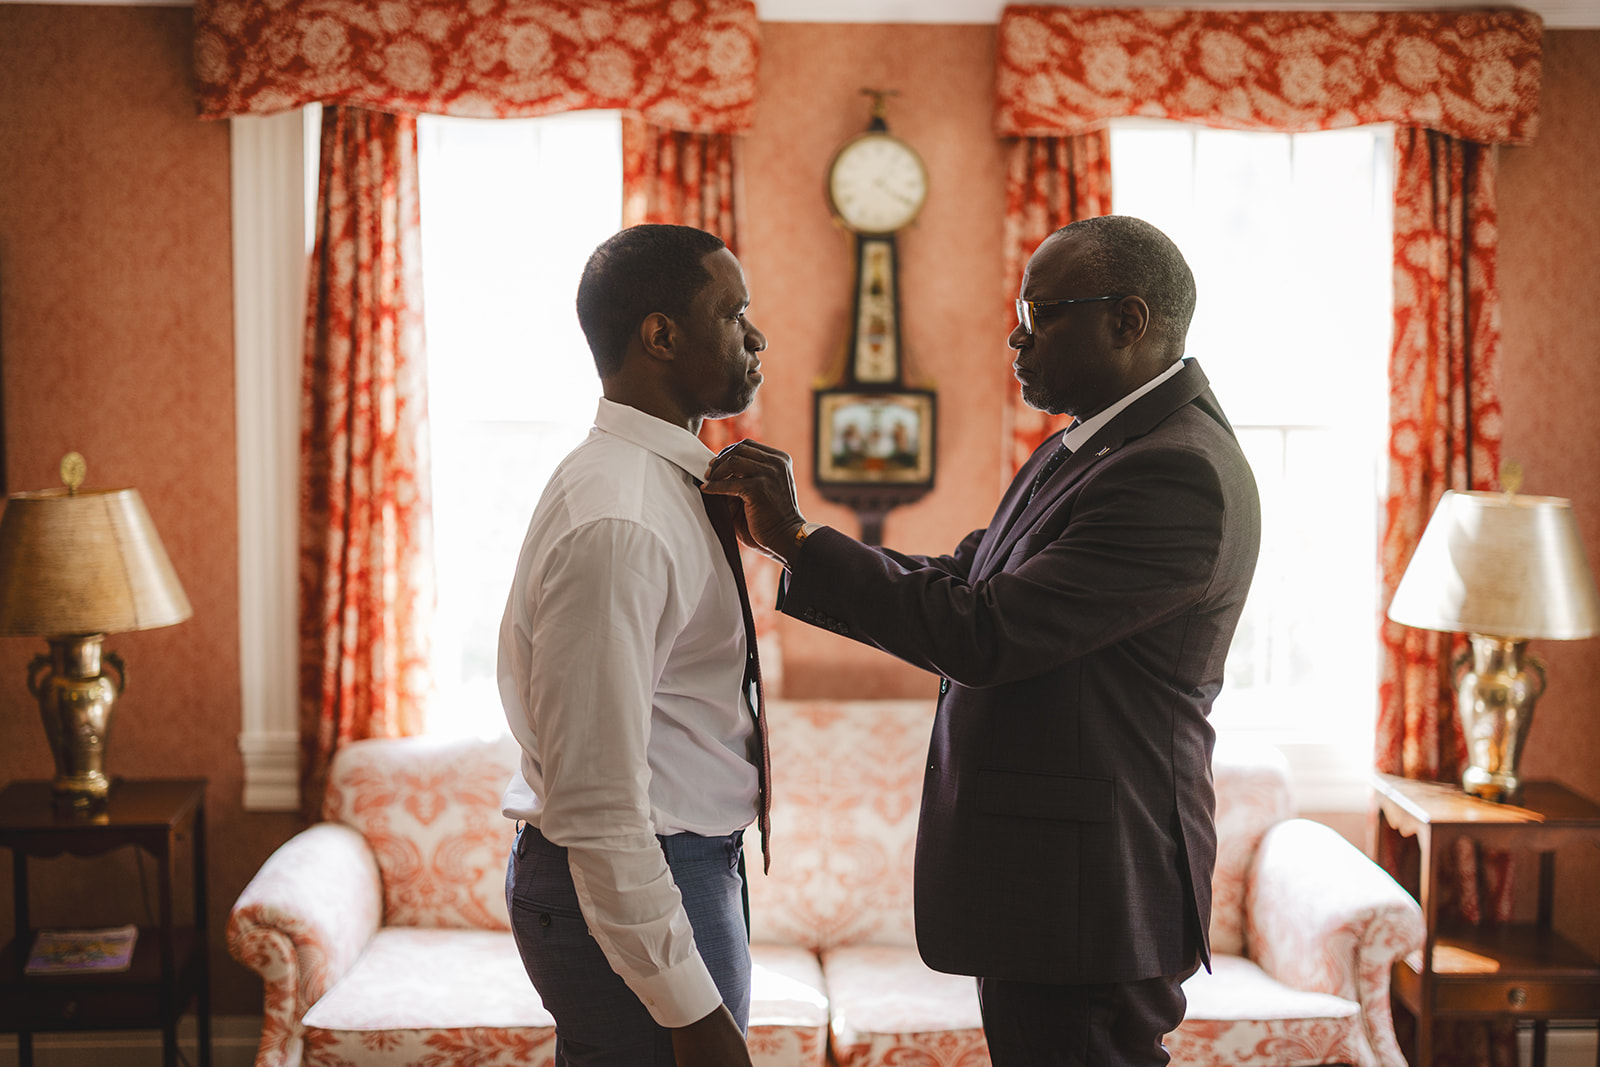 groom's father helps his son get ready for wedding by tying his tie